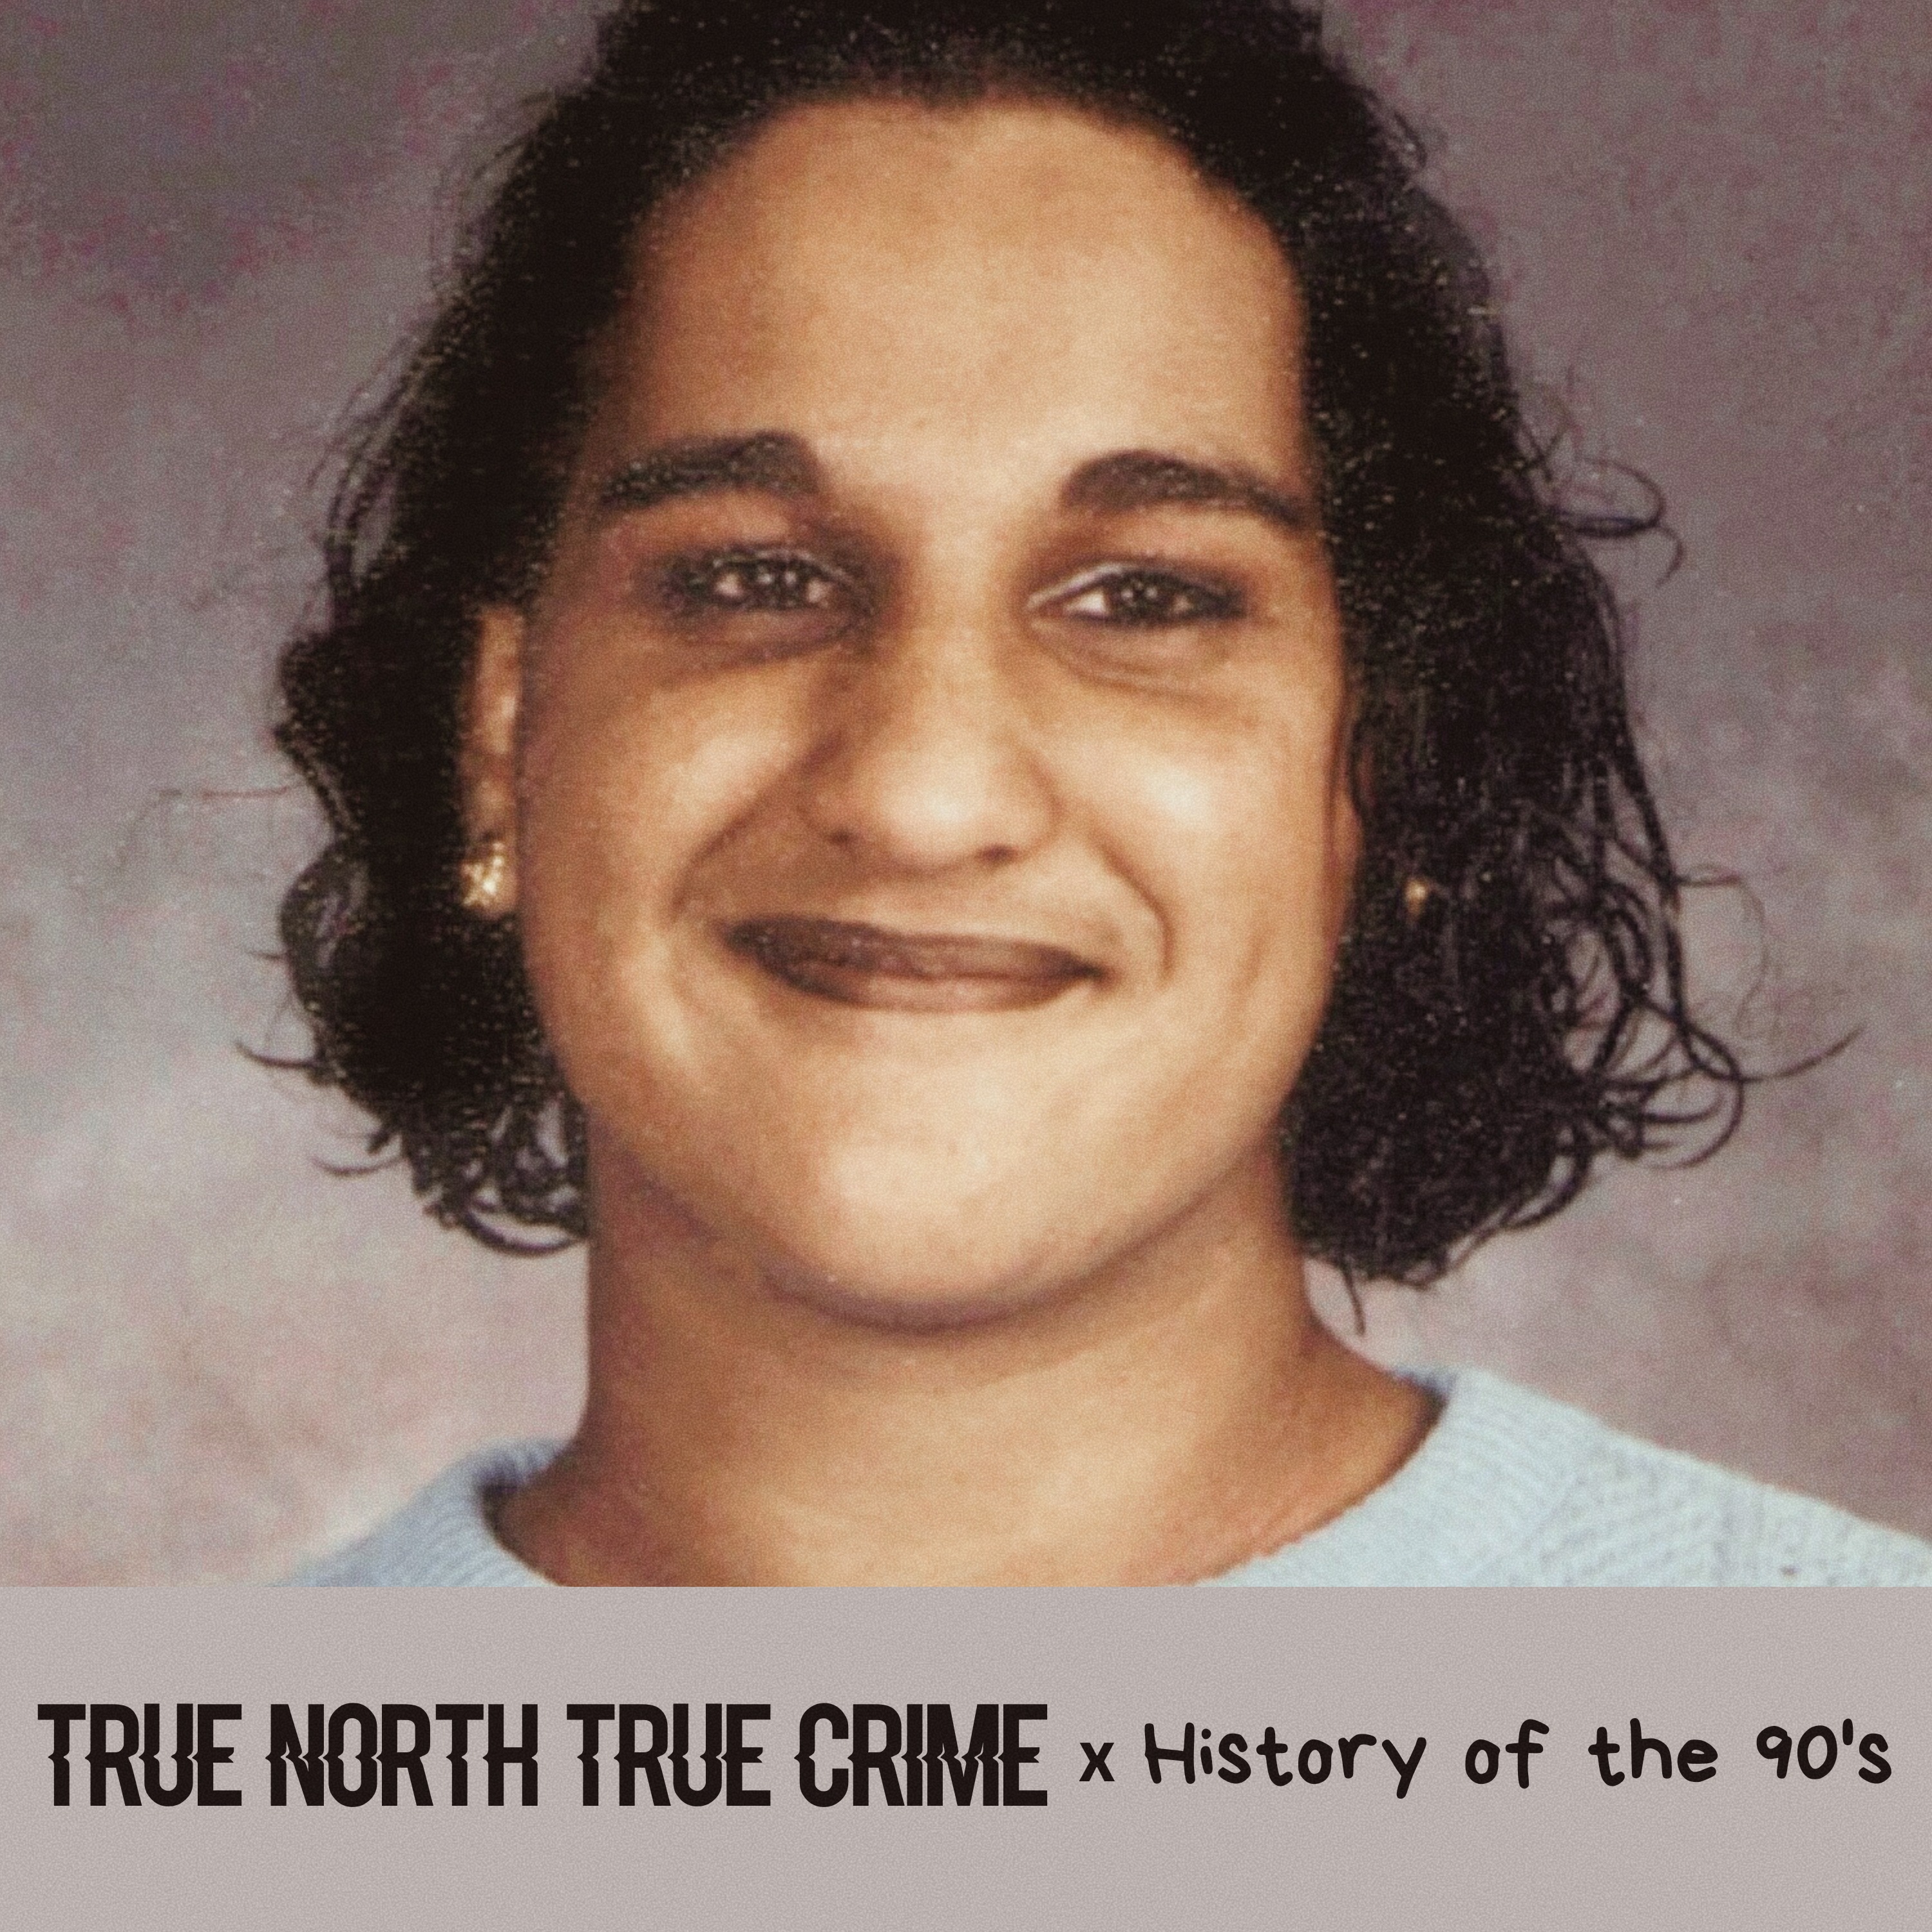 cover art for History of the 90s x True North True Crime - Reena Virk Part 2